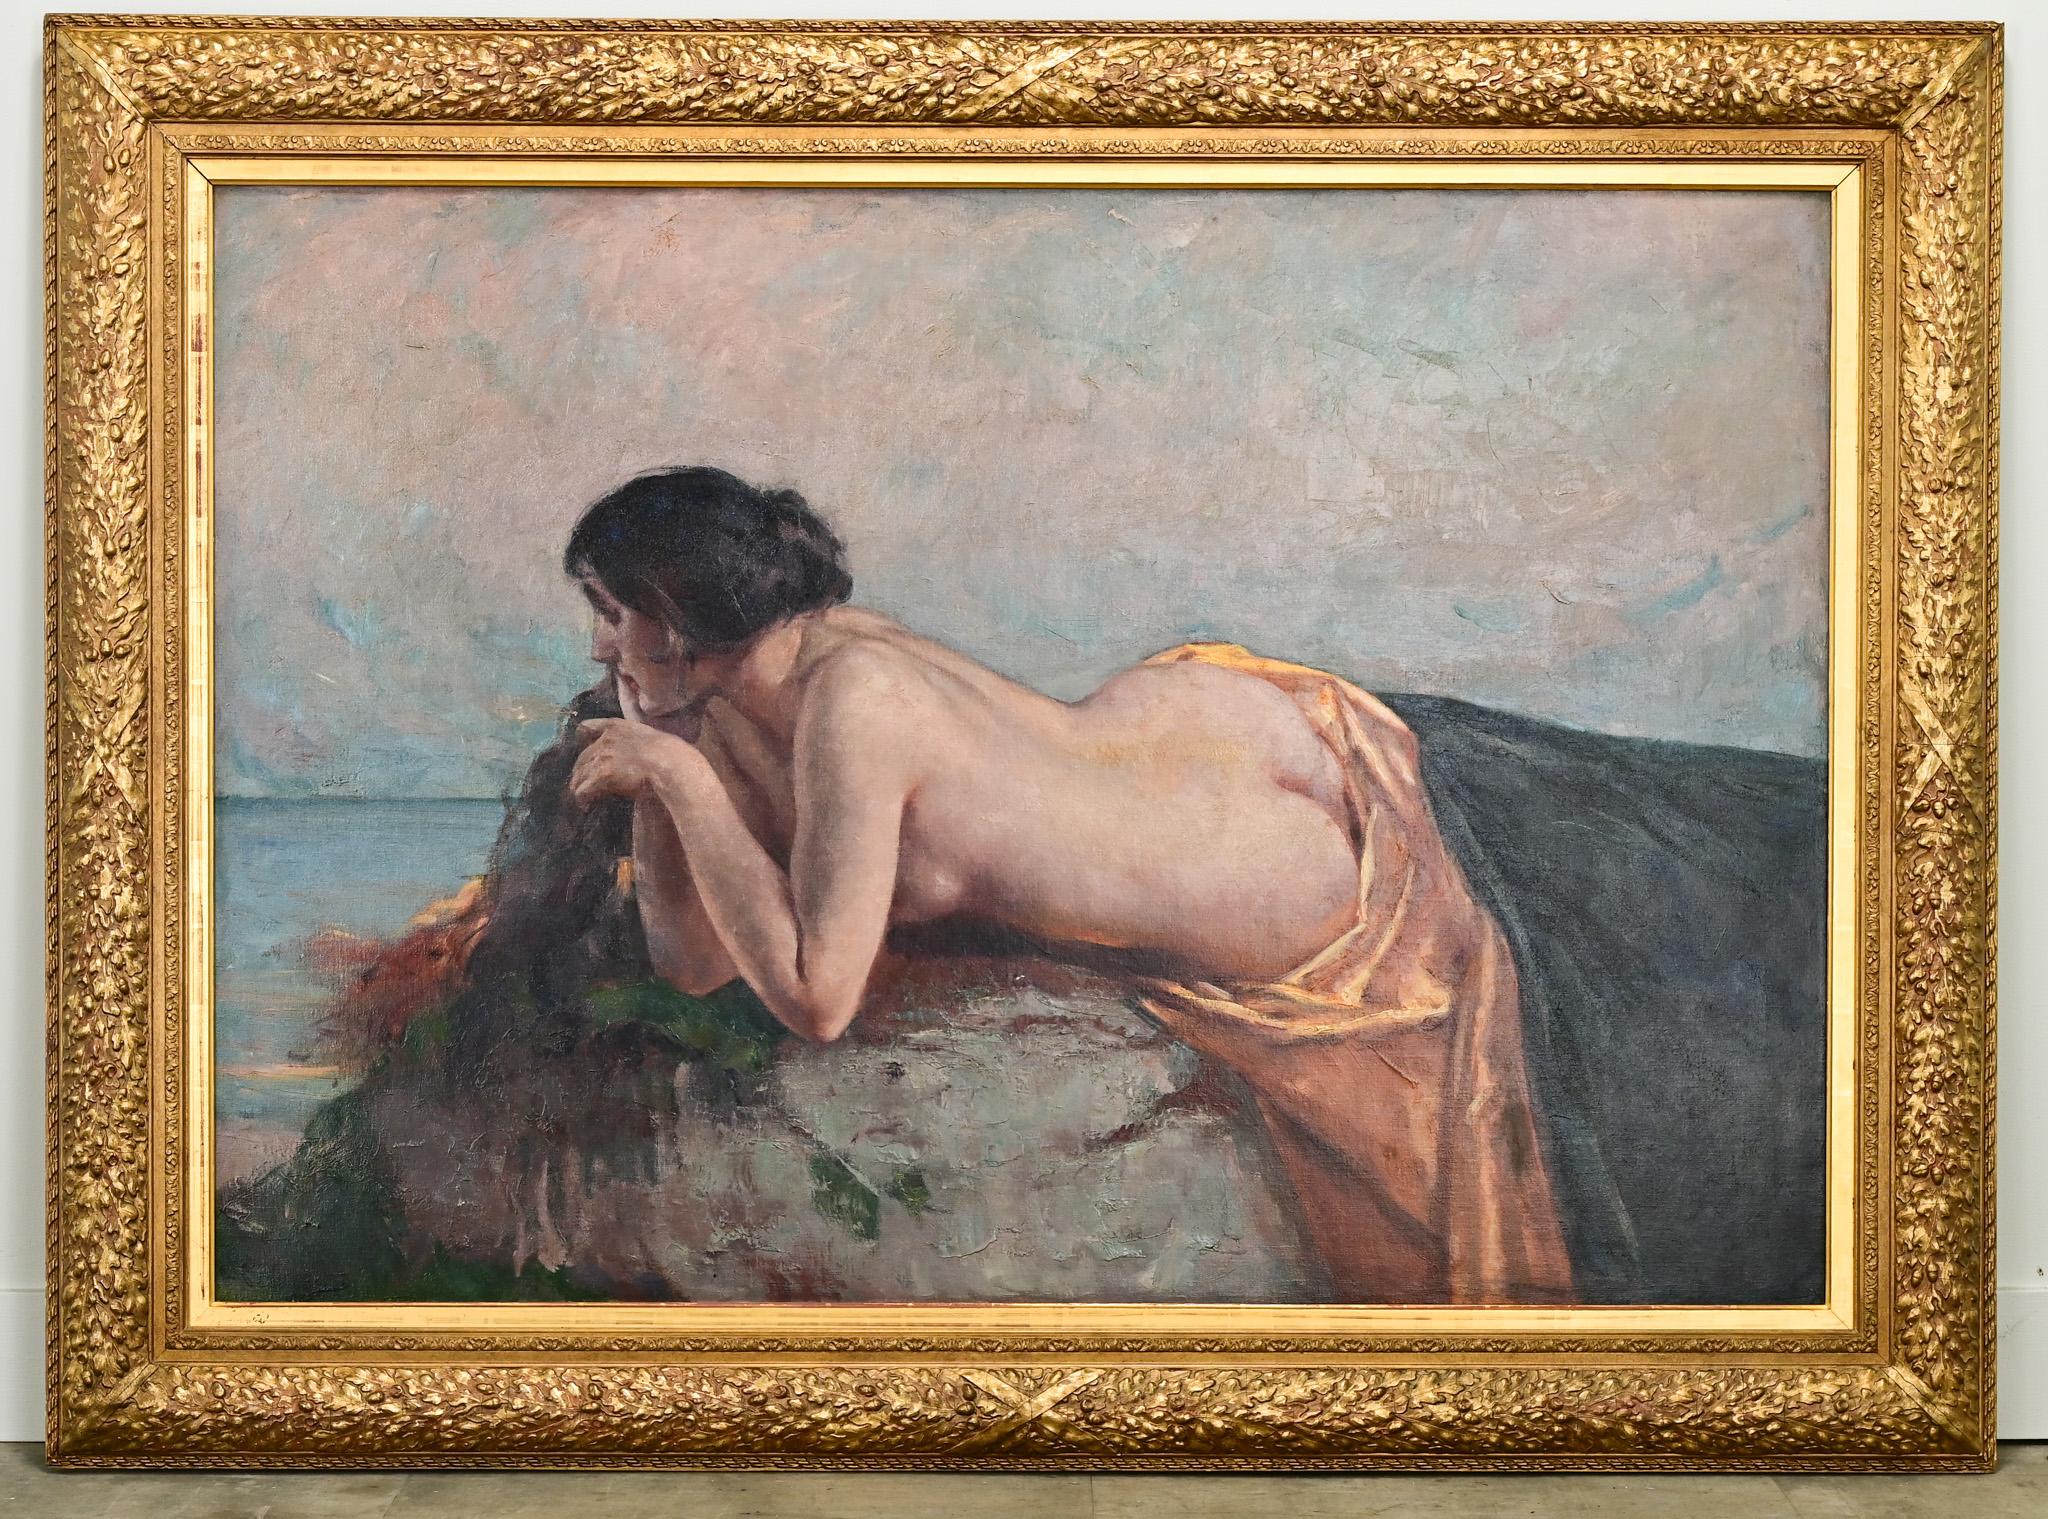 A large scale framed painting by Belgian Artist, Gerard Roosens 1869 - 1935. Entitled “Girl on a Beach” is signed by the artist. The oil painting is on canvas and is surrounded by a museum quality carved and gold gilt frame. Be sure to view the